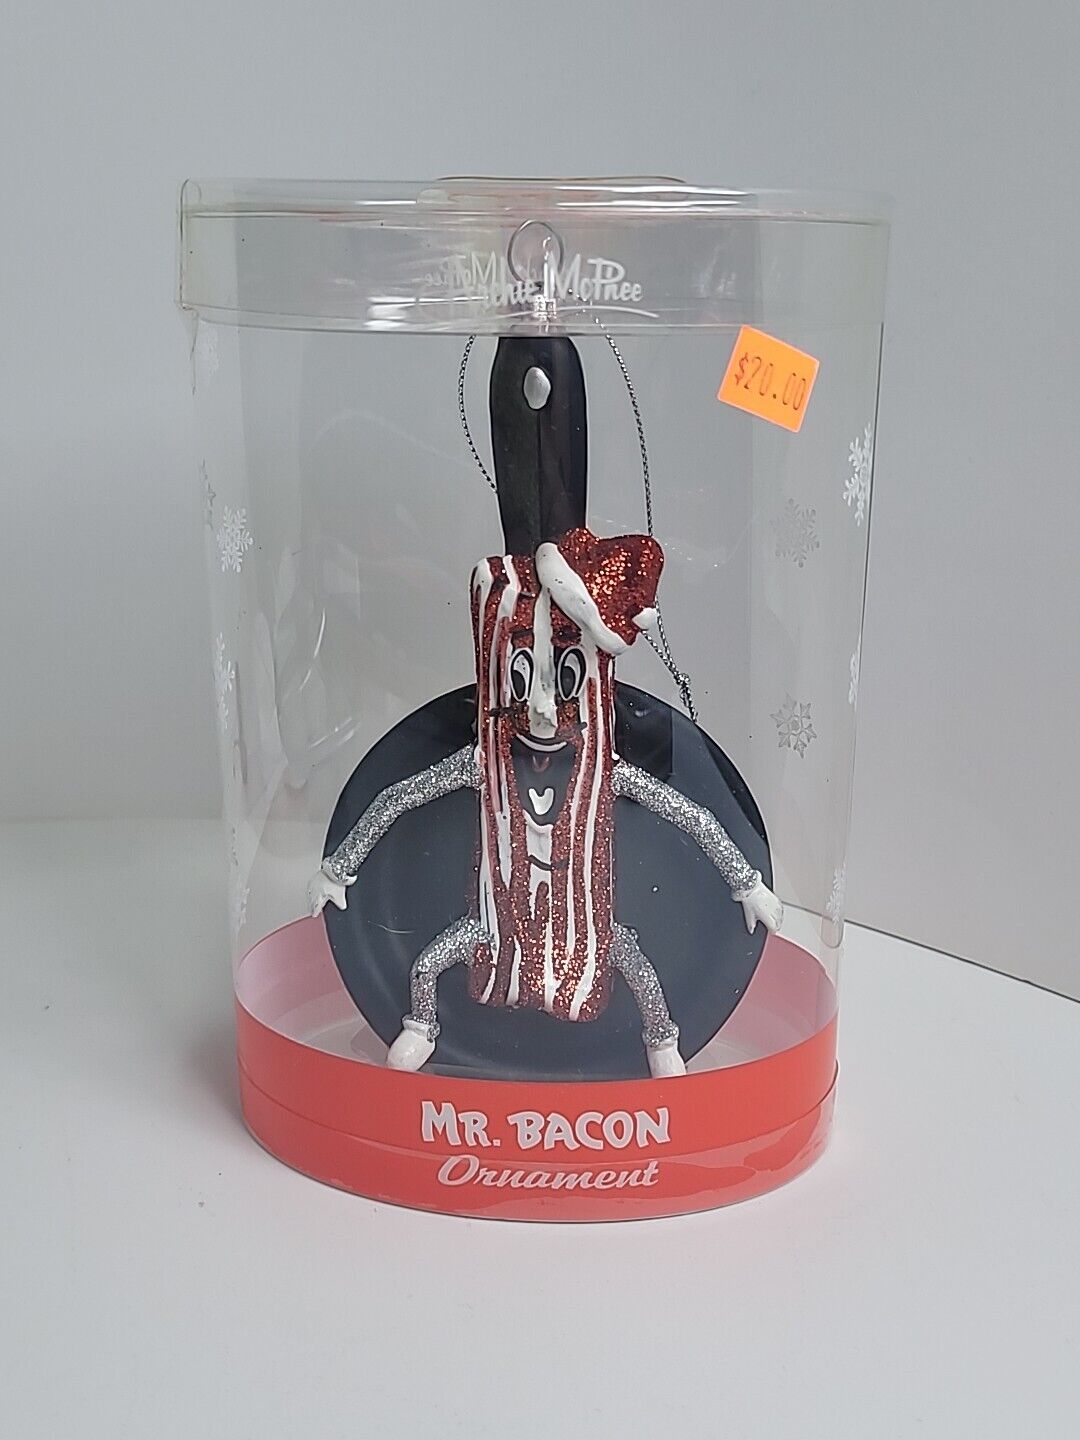 2016 ARCHIE MCPHEE MR. BACON ORNAMENTS - NEW